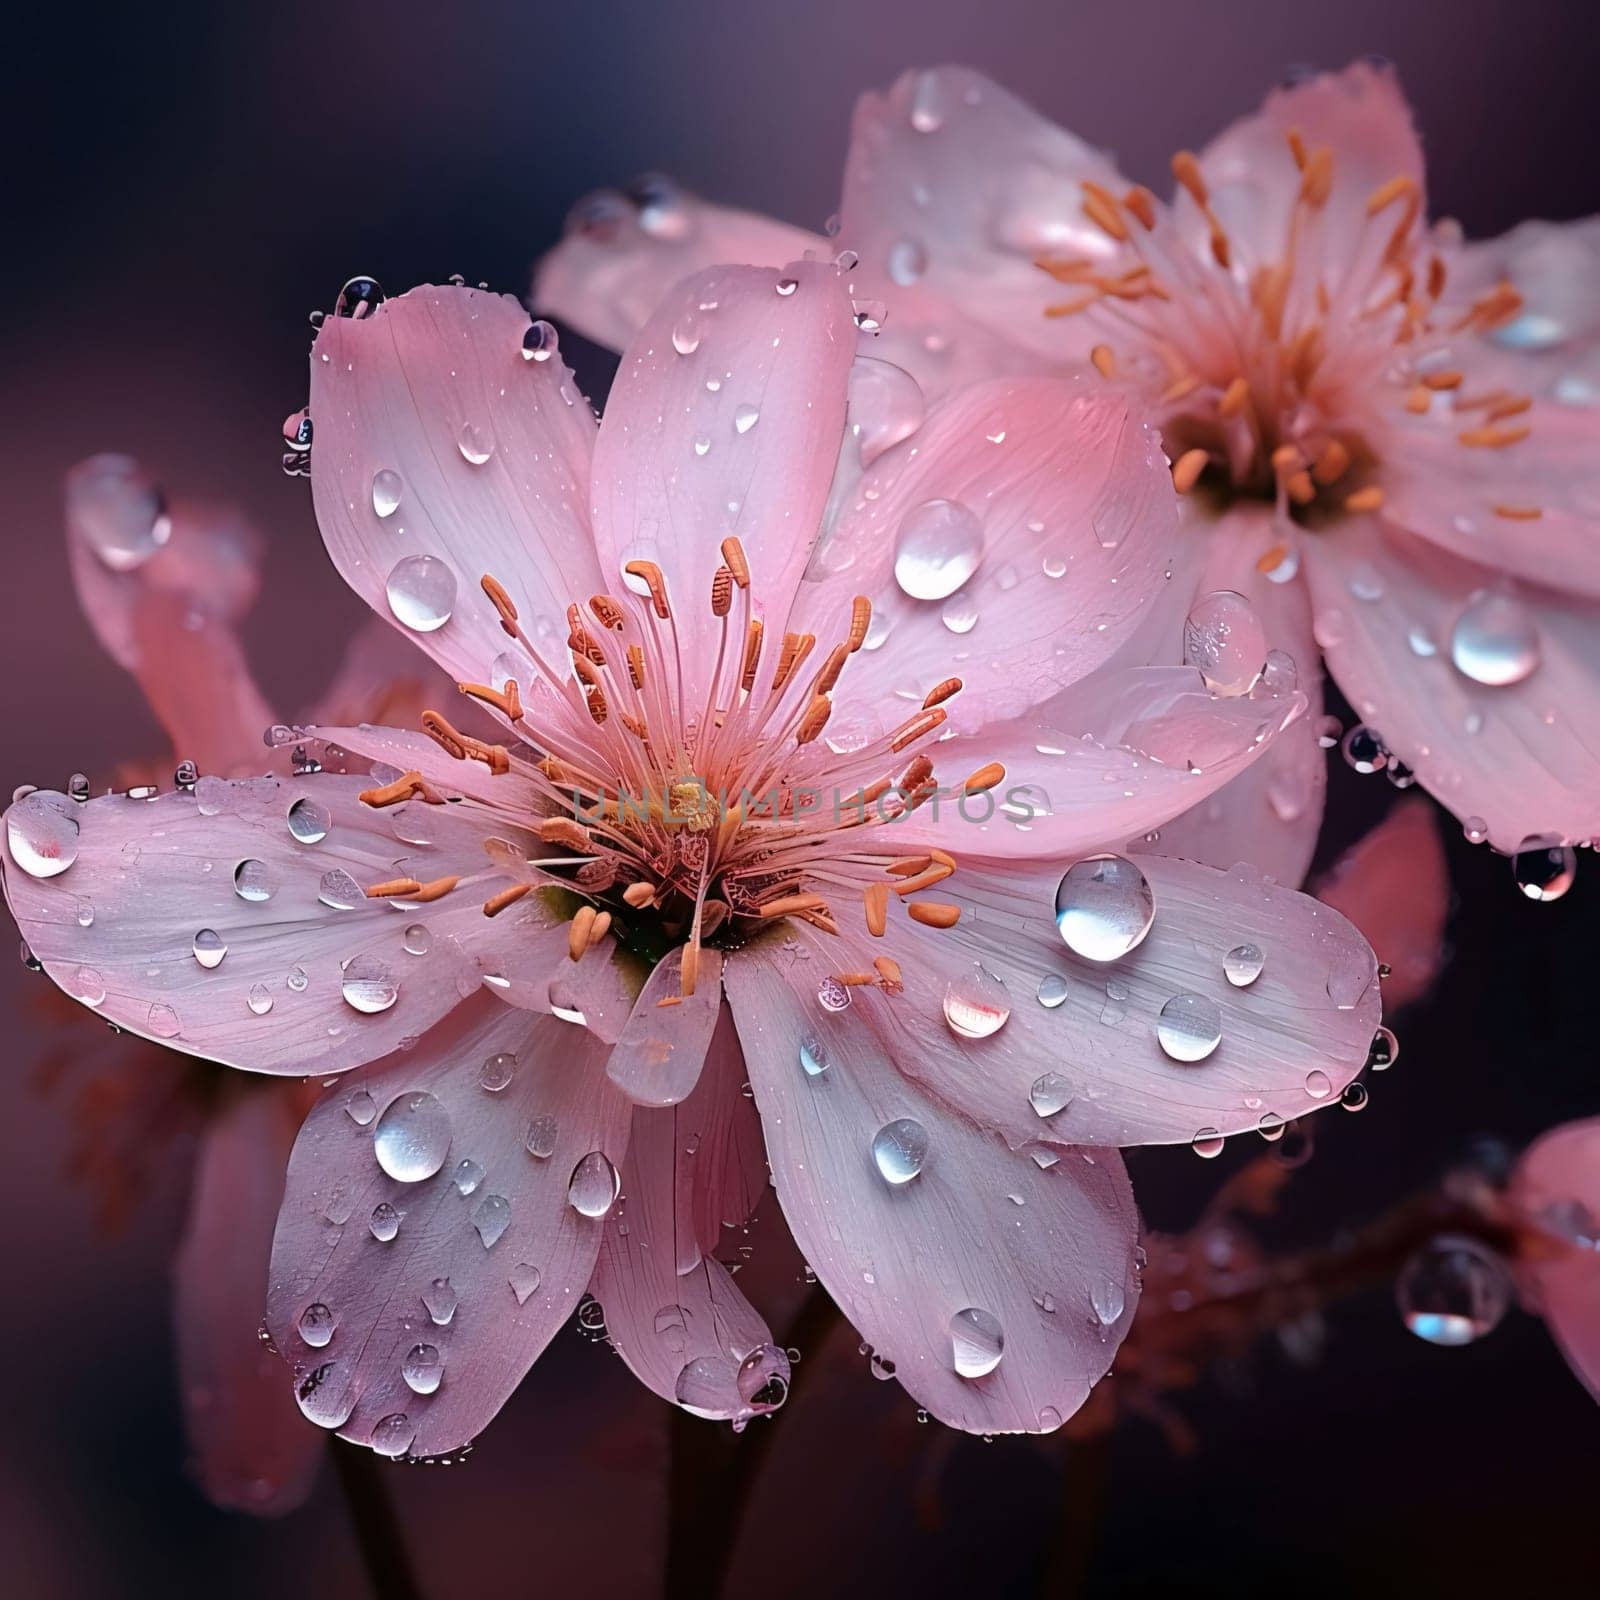 Pink flowers, petals with raindrops on a dark background. Flowering flowers, a symbol of spring, new life. A joyful time of nature waking up to life.